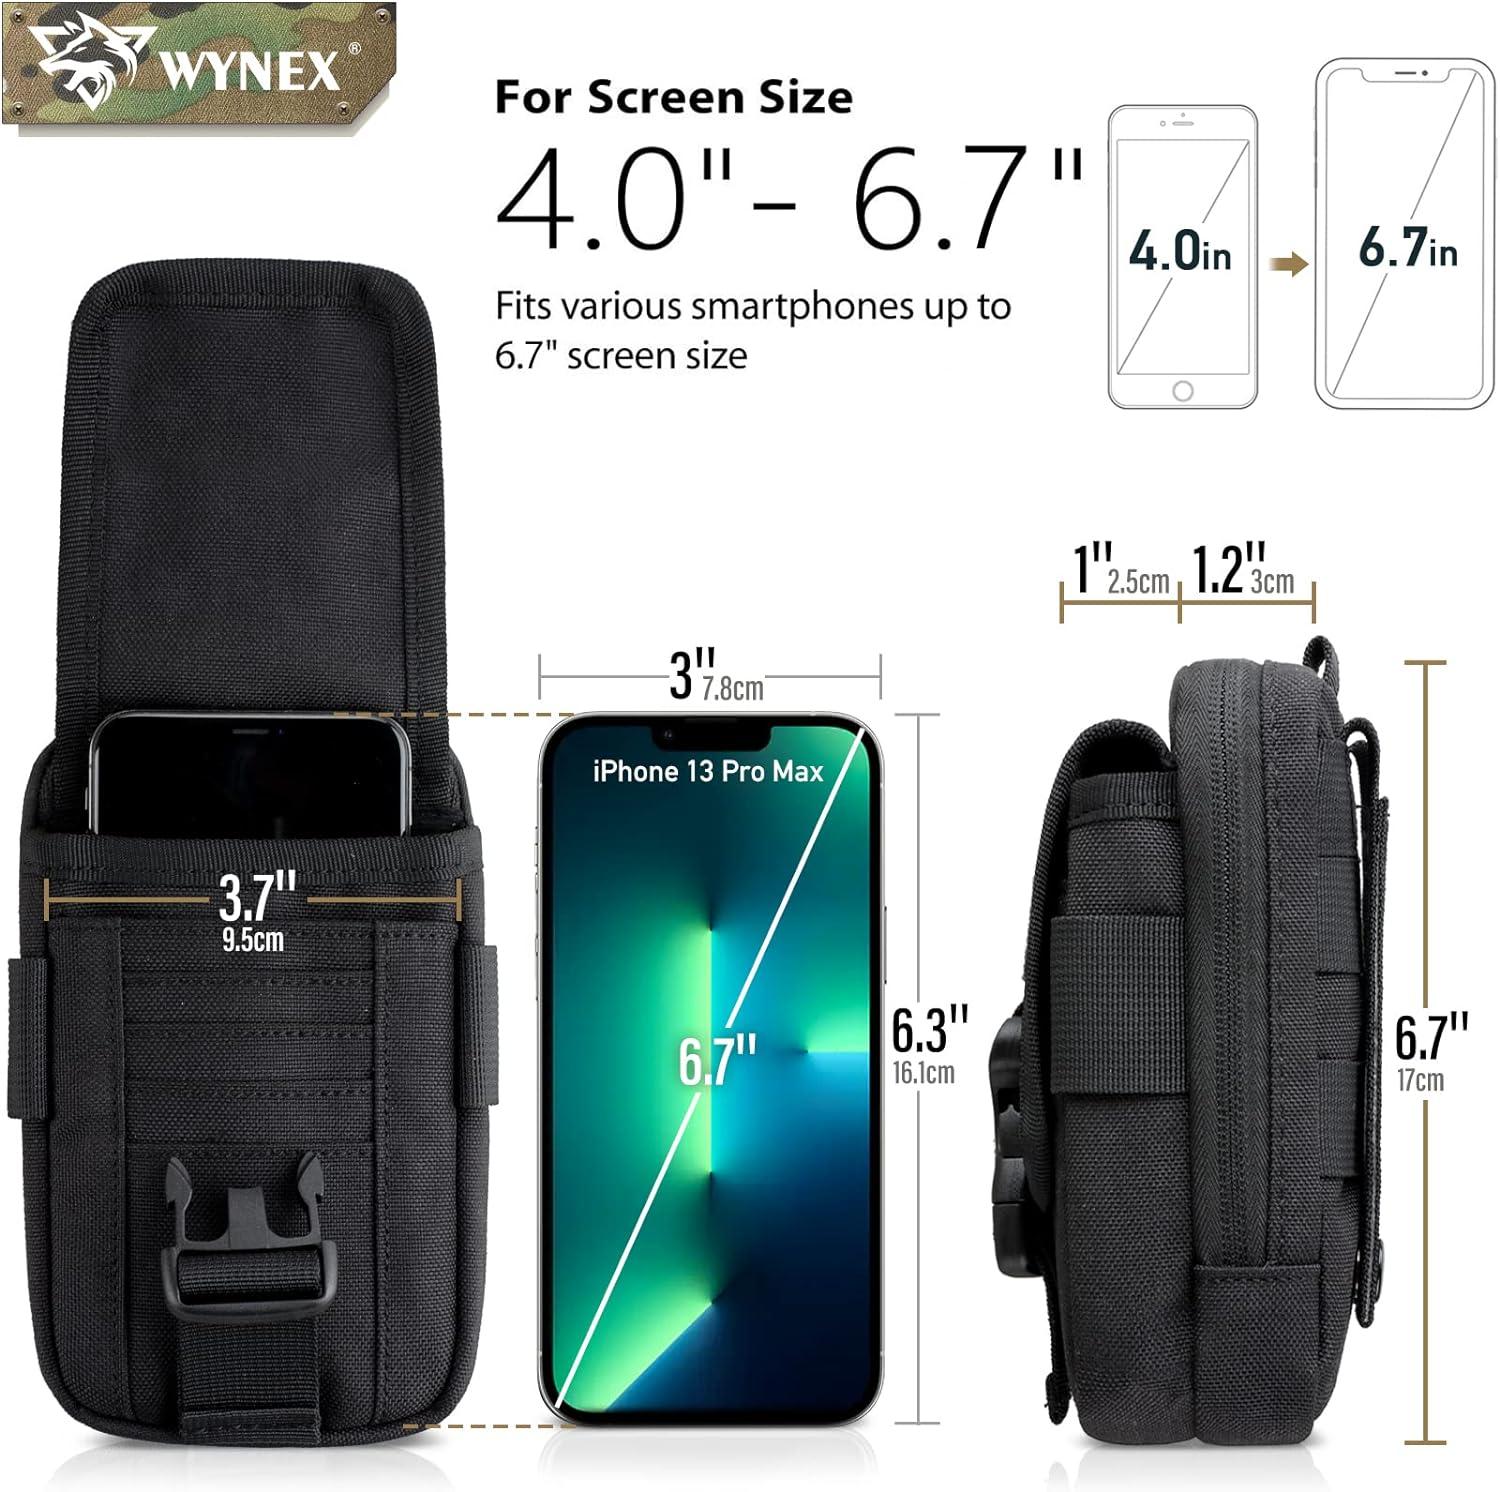  WYNEX Tactical Compass Phone Pouch, Large Molle Smartphone  Holster Case Double Capacity Small Utility EDC Pouch with Compass Buckle  and Carabiner Army Green : Sports & Outdoors